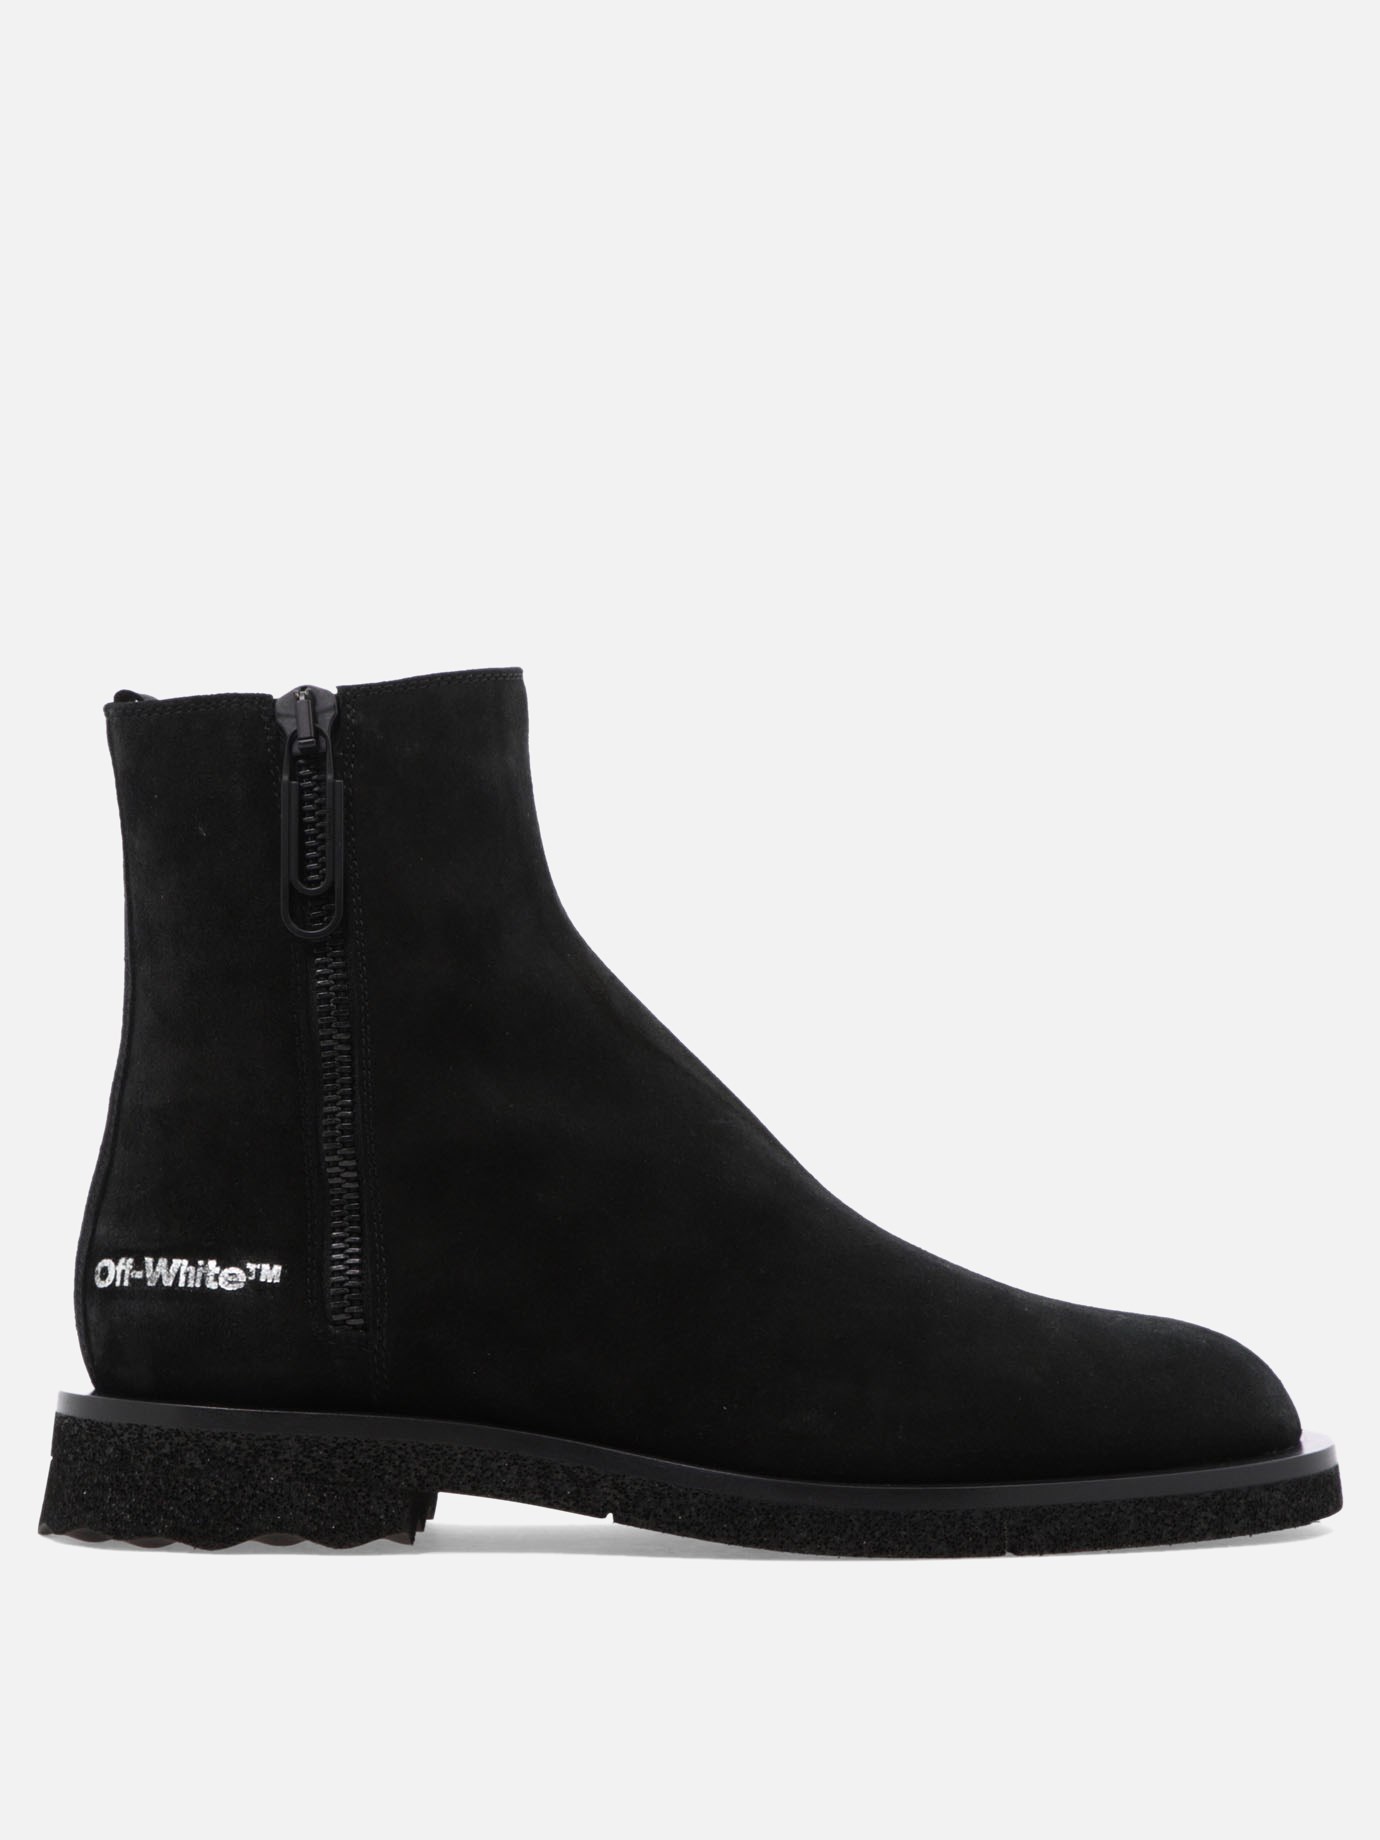  Suede Spongesole  ankle bootsby Off-White - 4